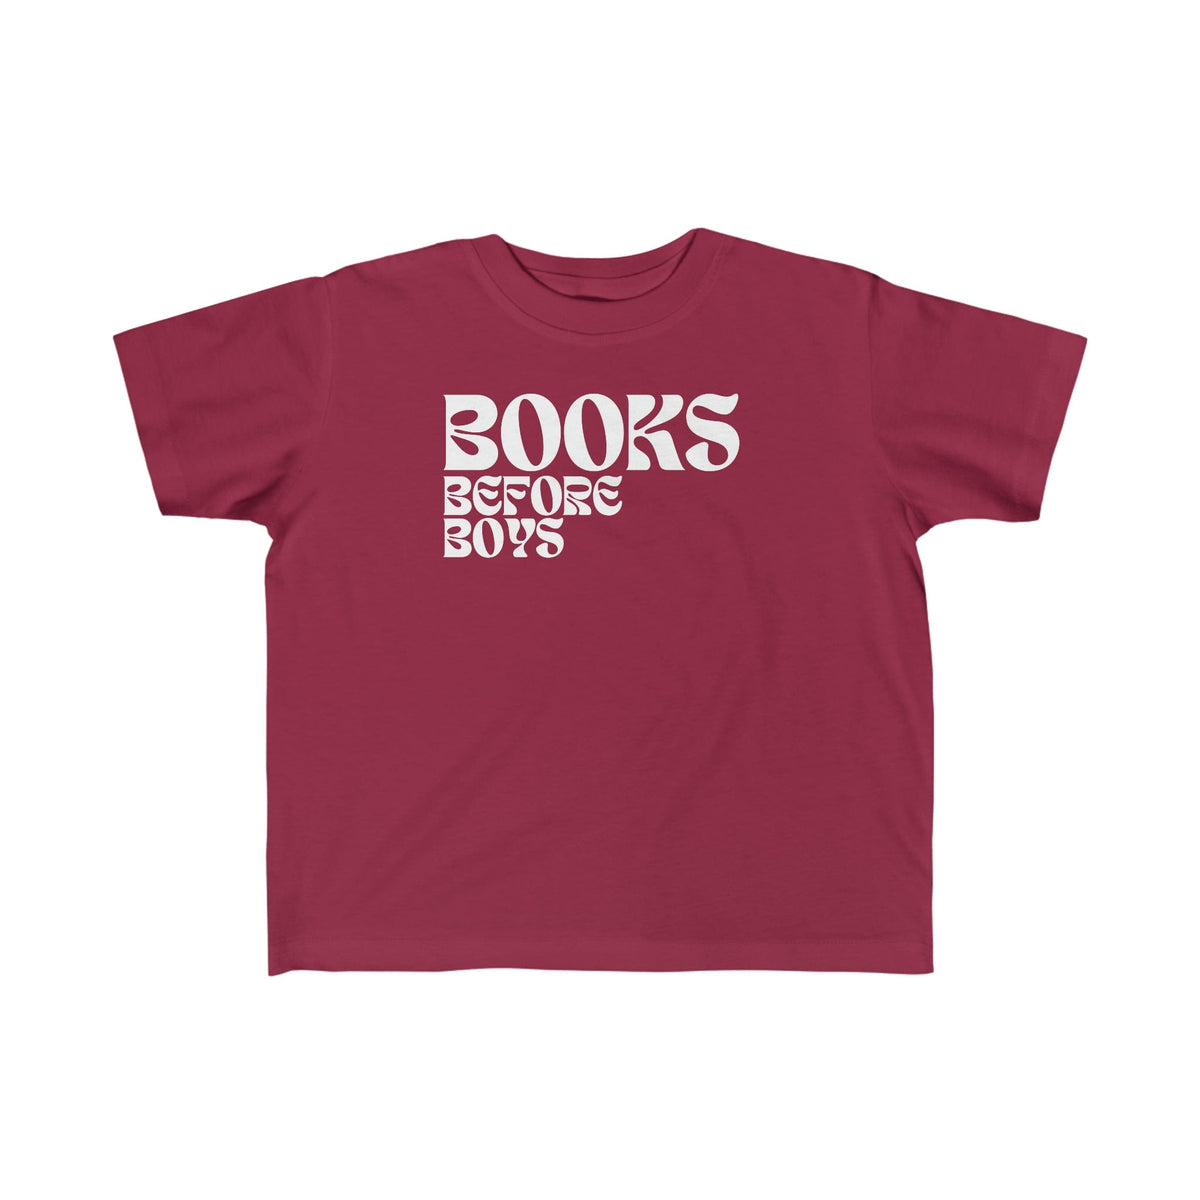 Books Before Boys Toddler Tee | Cute Girls Shirt Kids clothes TheFringeCultureCollective